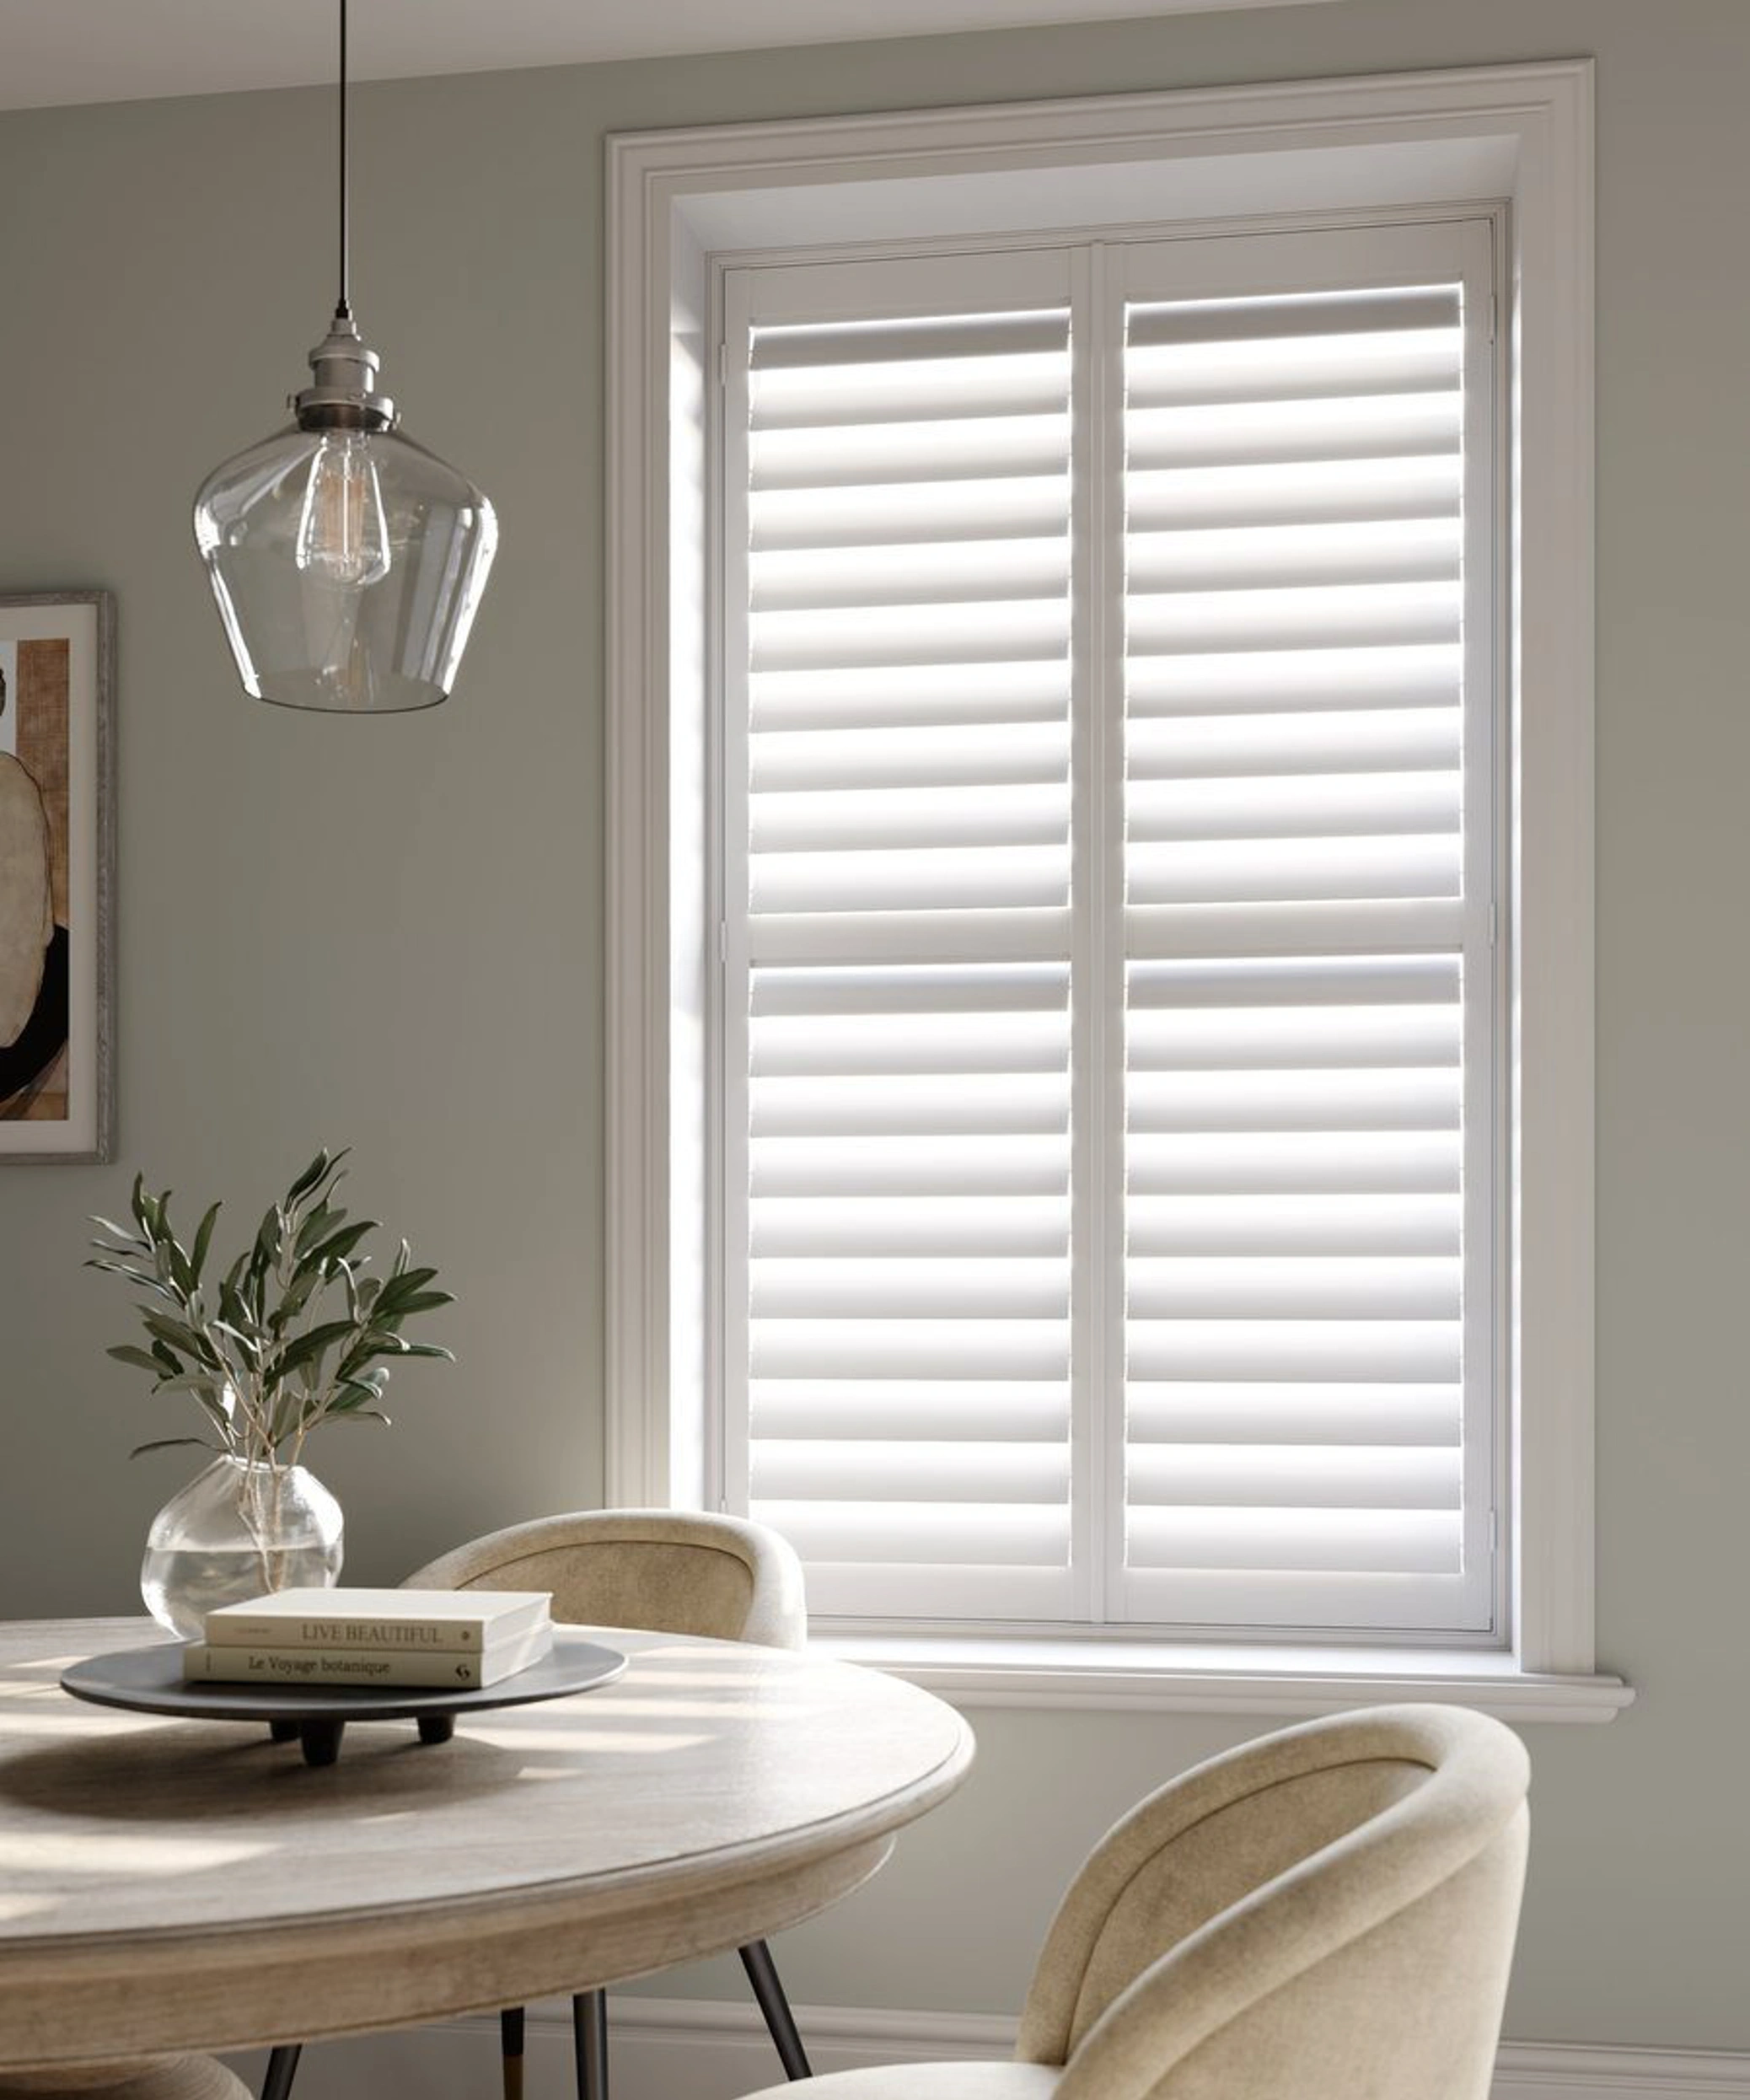 Vivid White wooden shutters and dining table